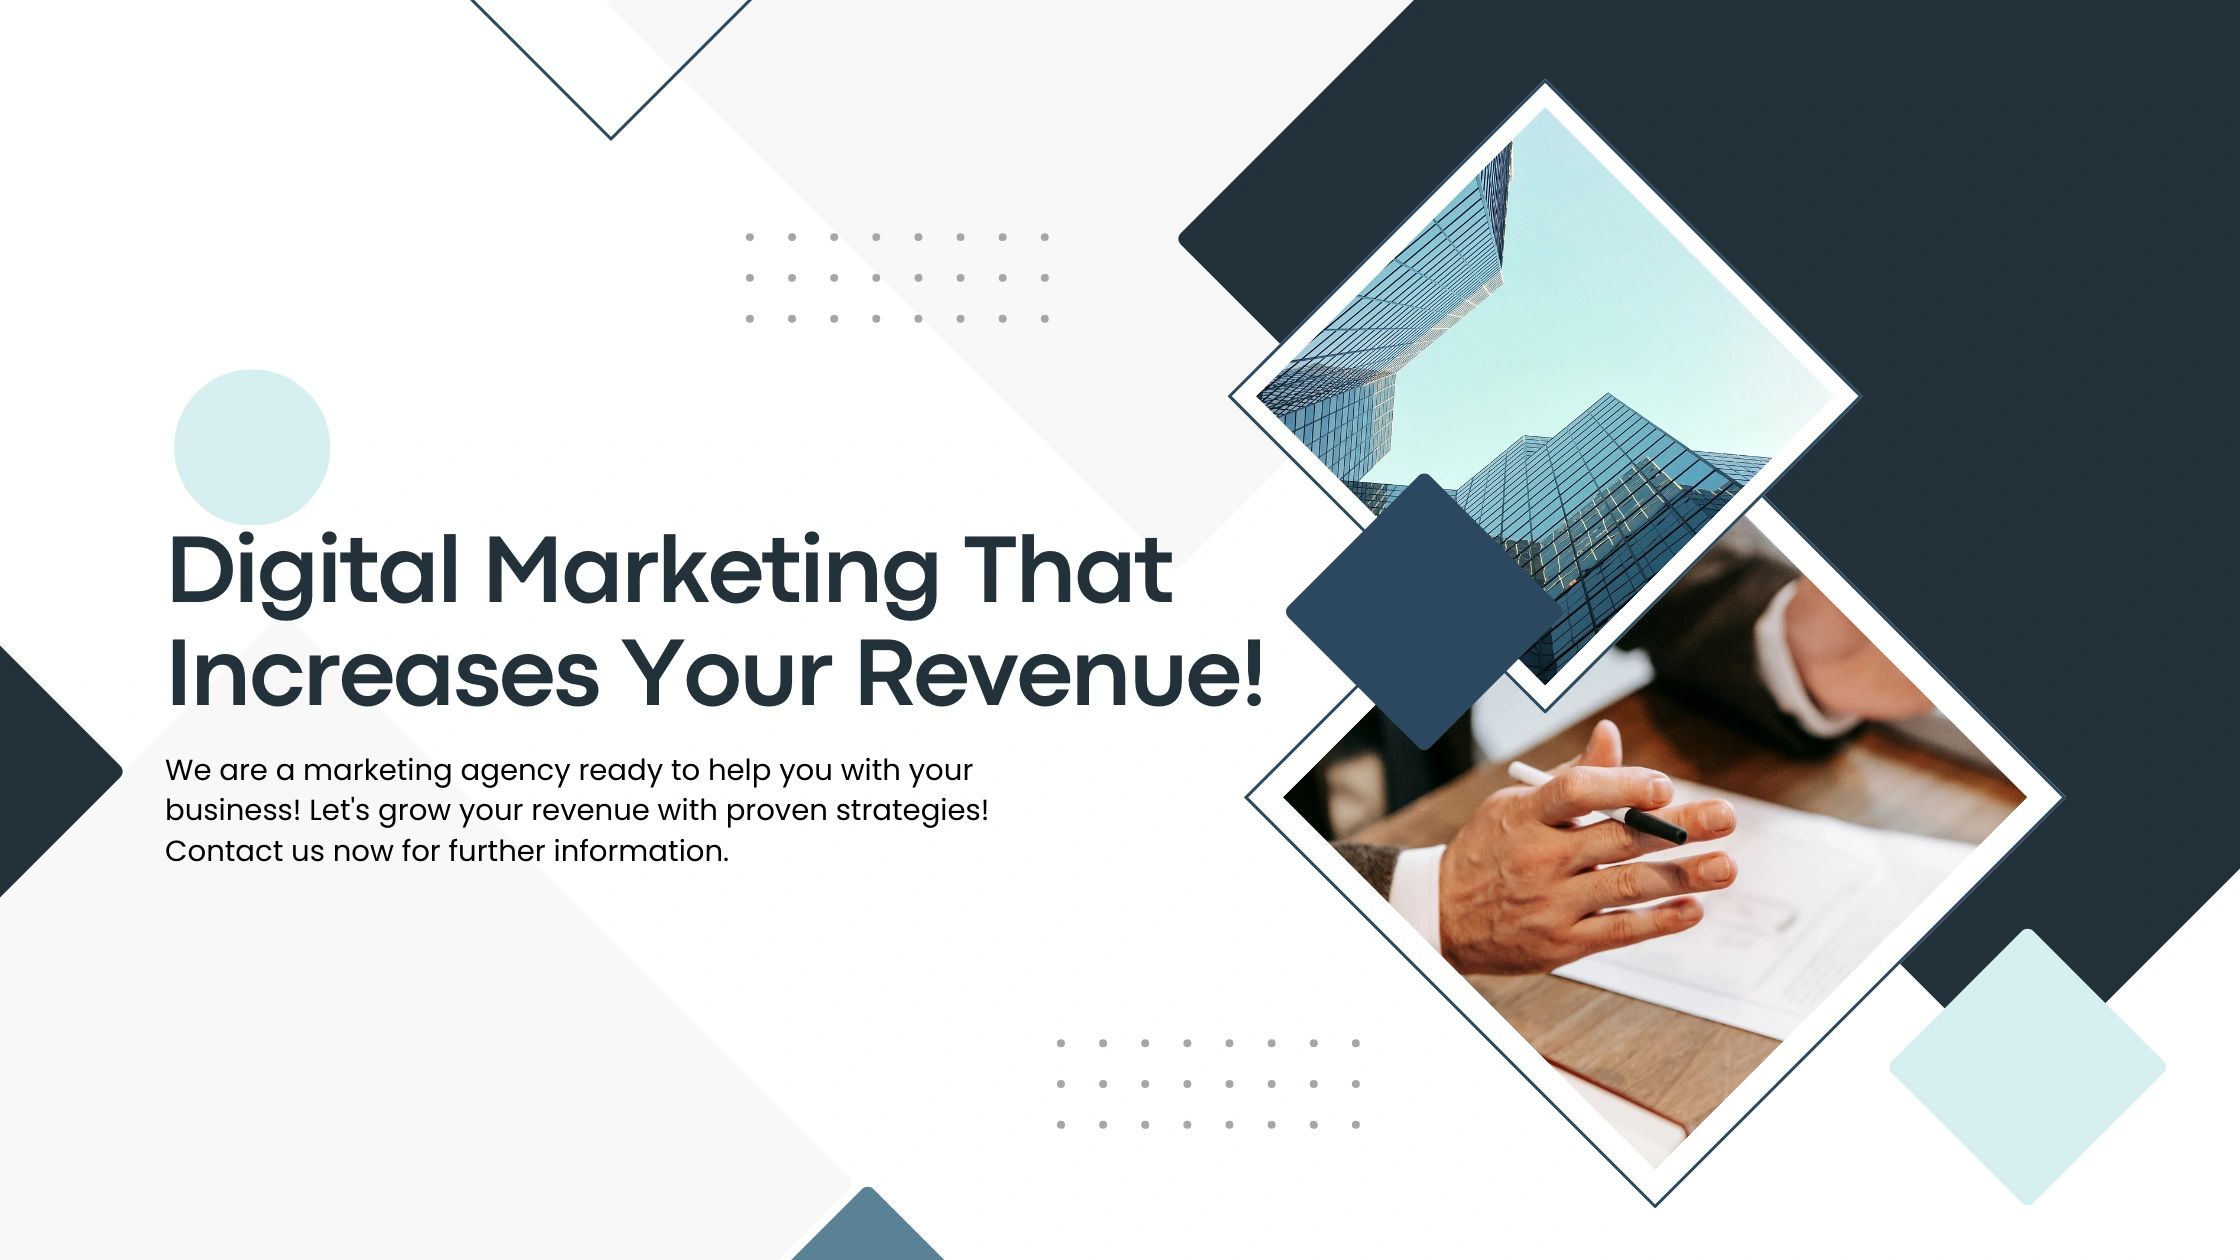 Digital marketing that increases your revenue header image